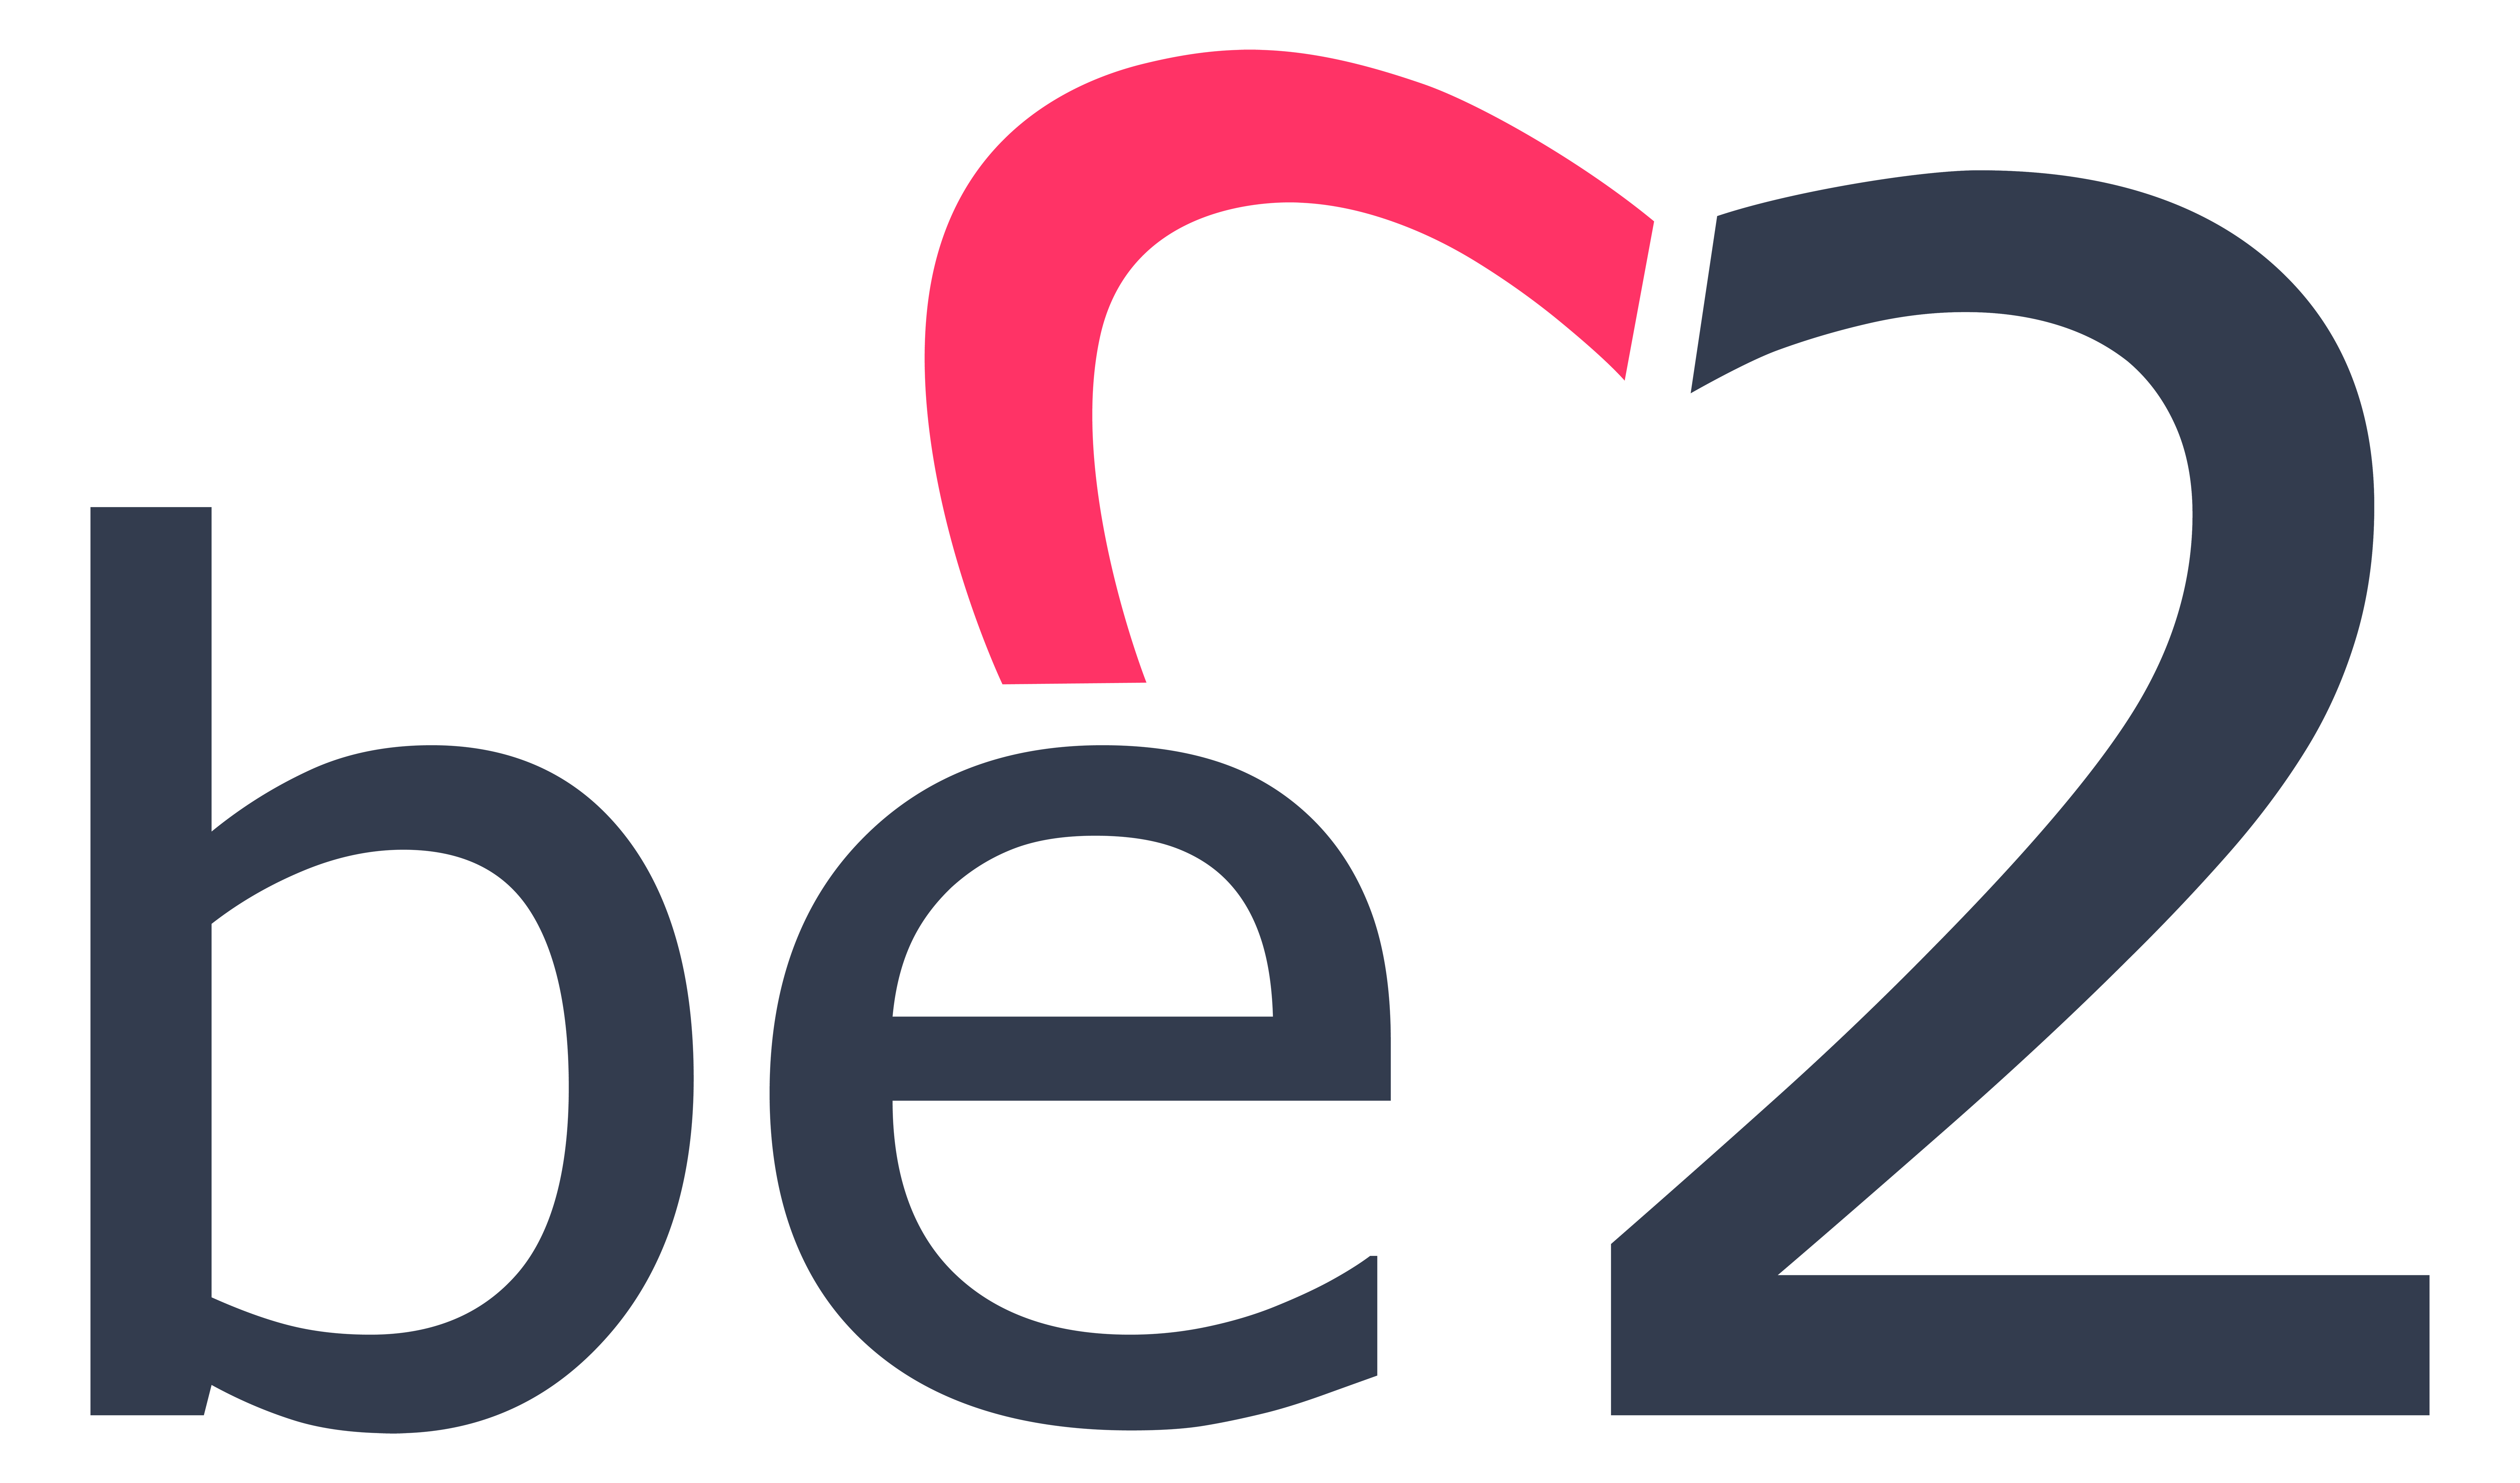 2be dating site